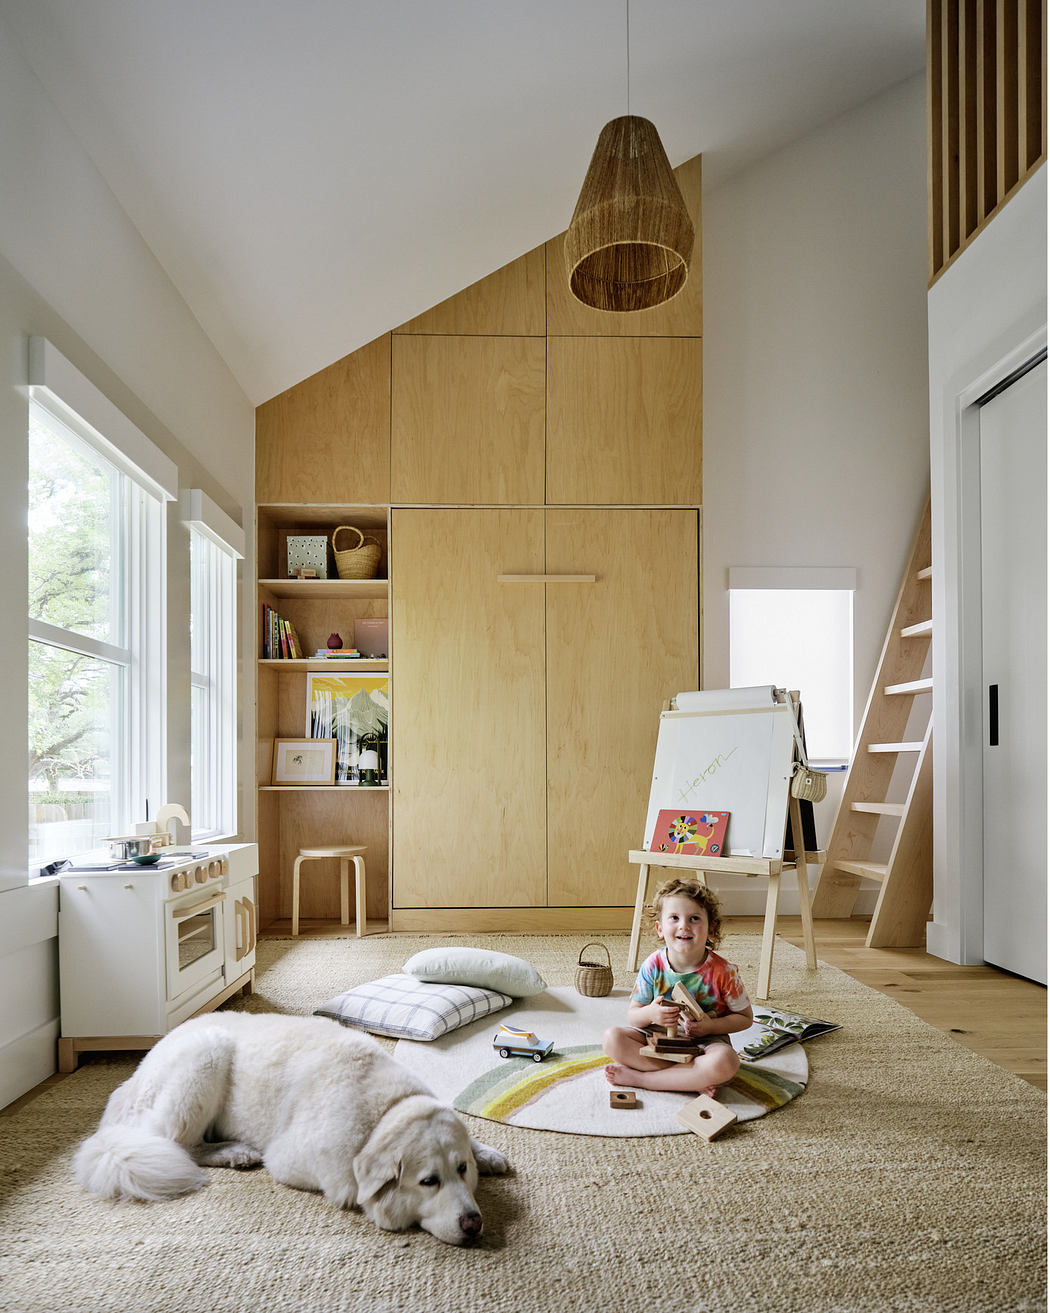 A child plays on a rug in a bright, modern room with wooden cabinetry